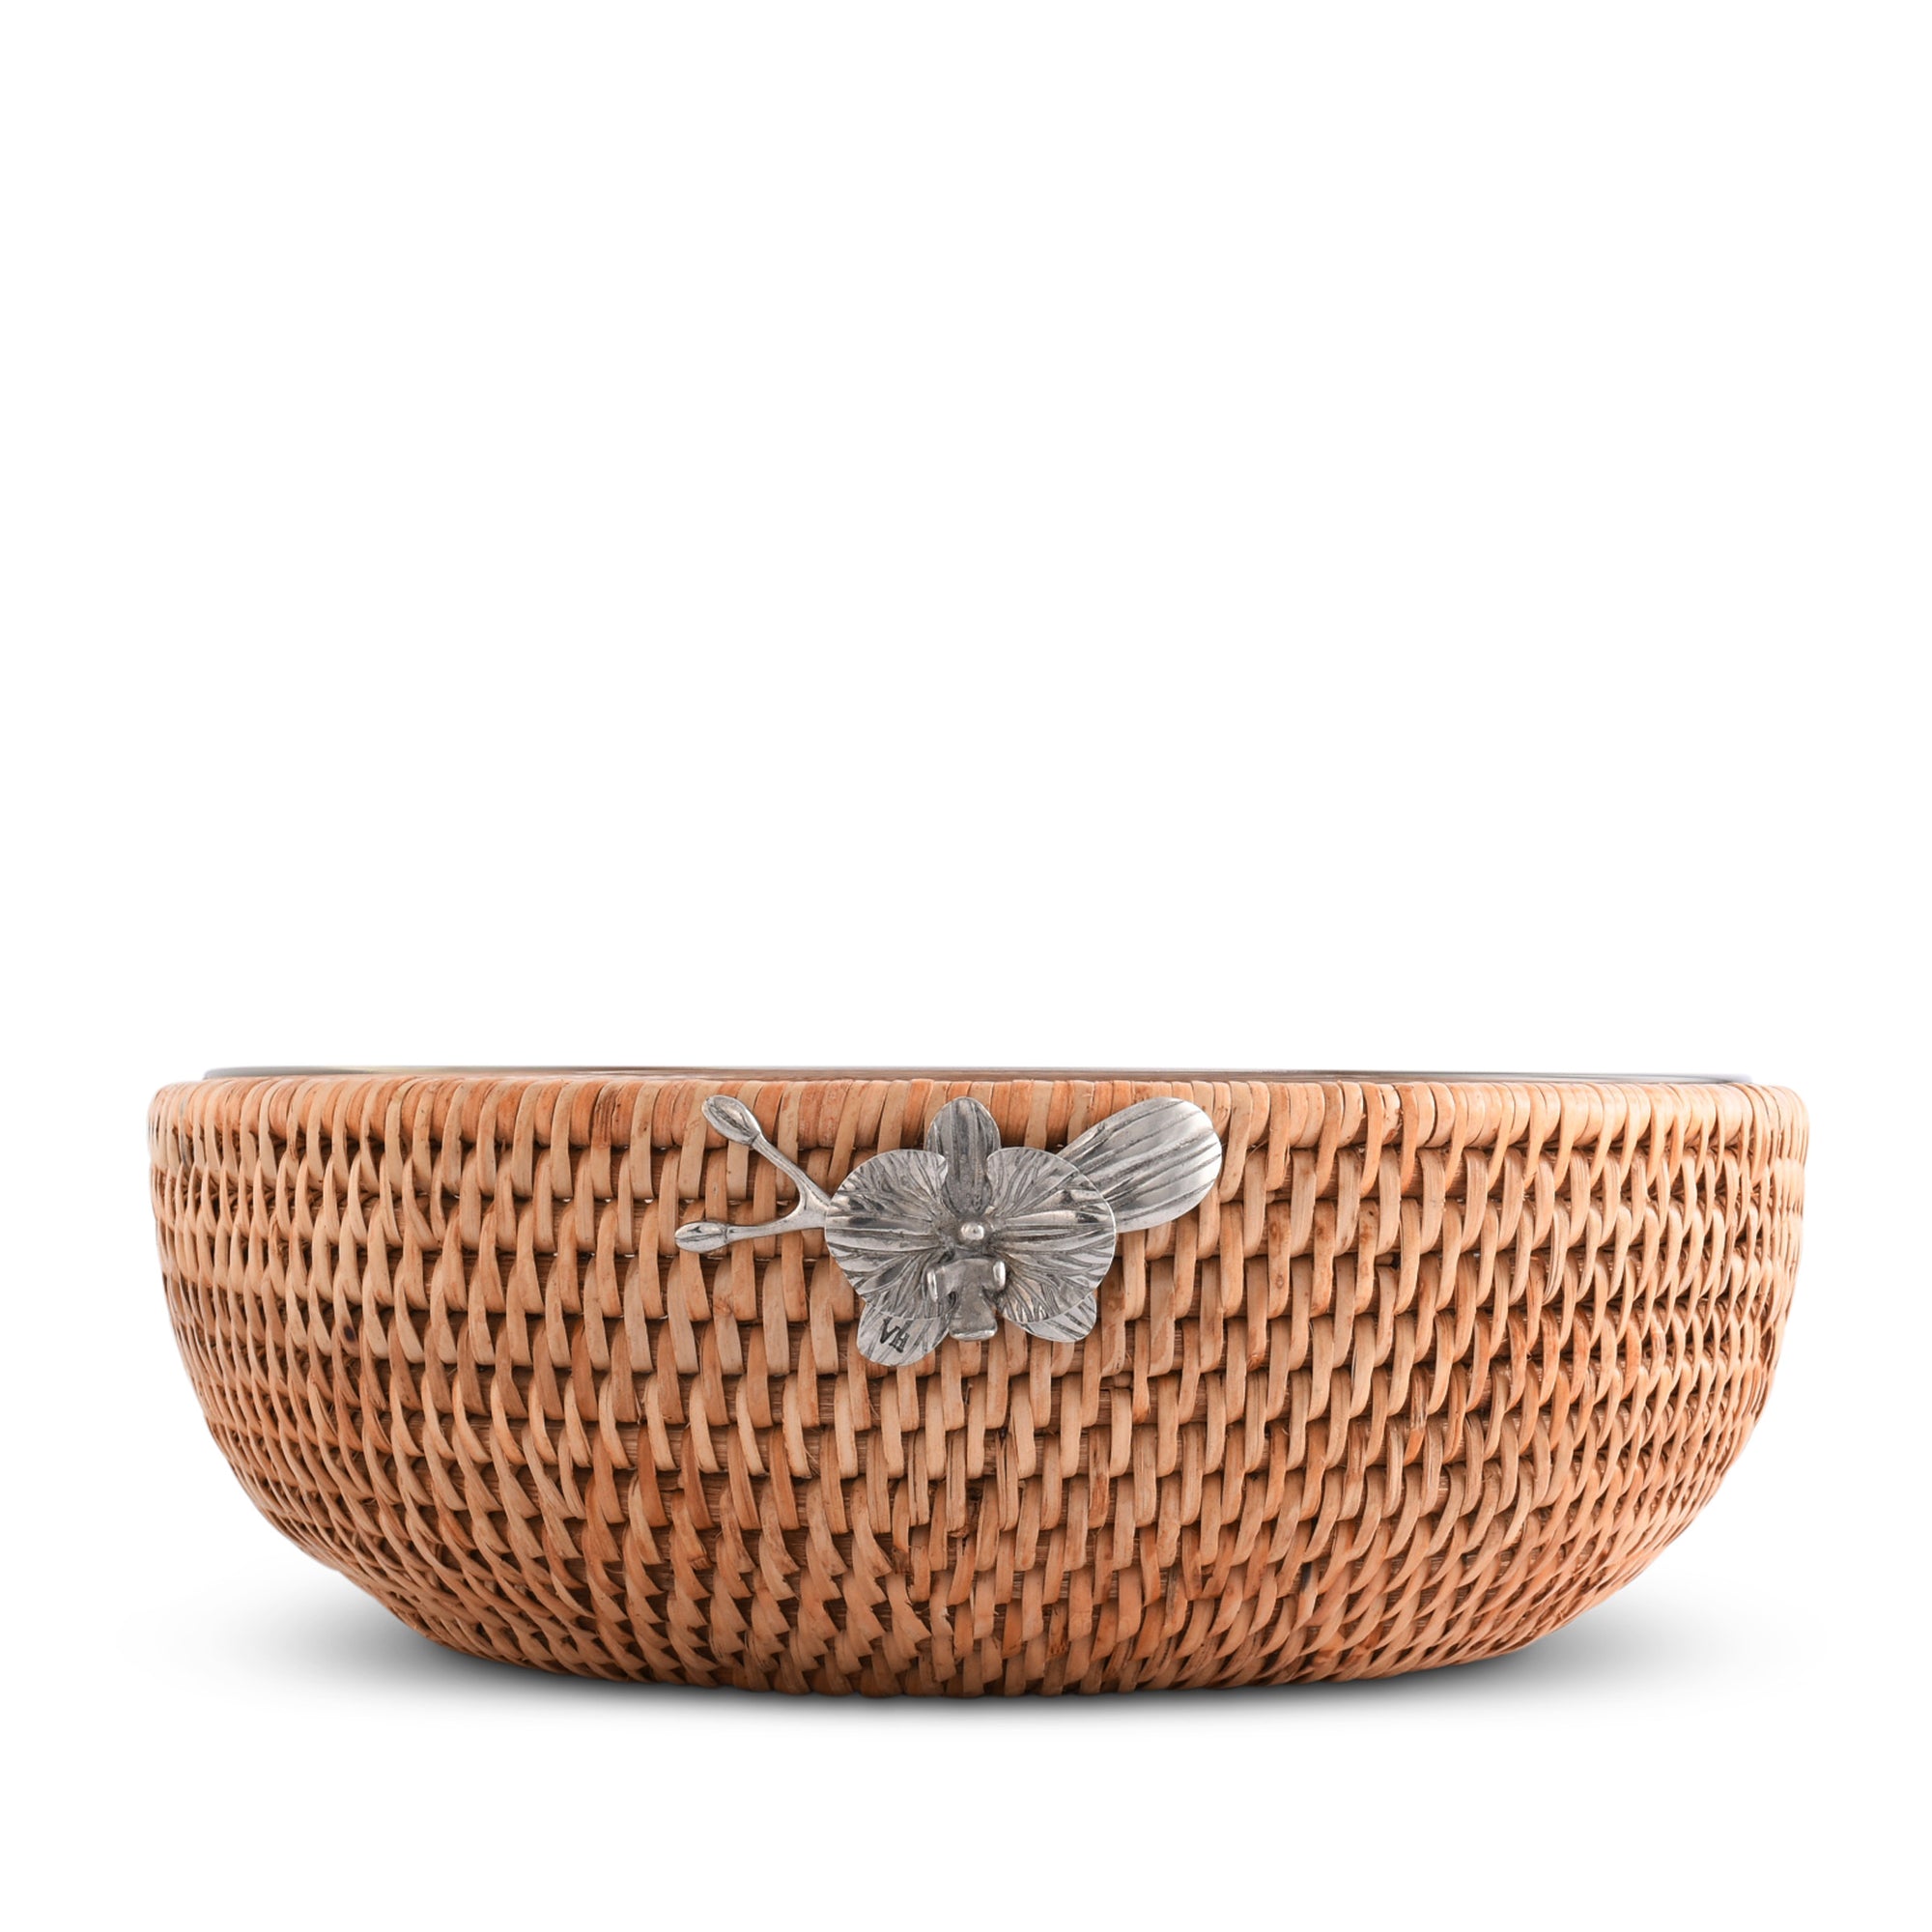 Vagabond House Orchid  Hand Woven Wicker Natural Rattan Serving Bowl Product Image